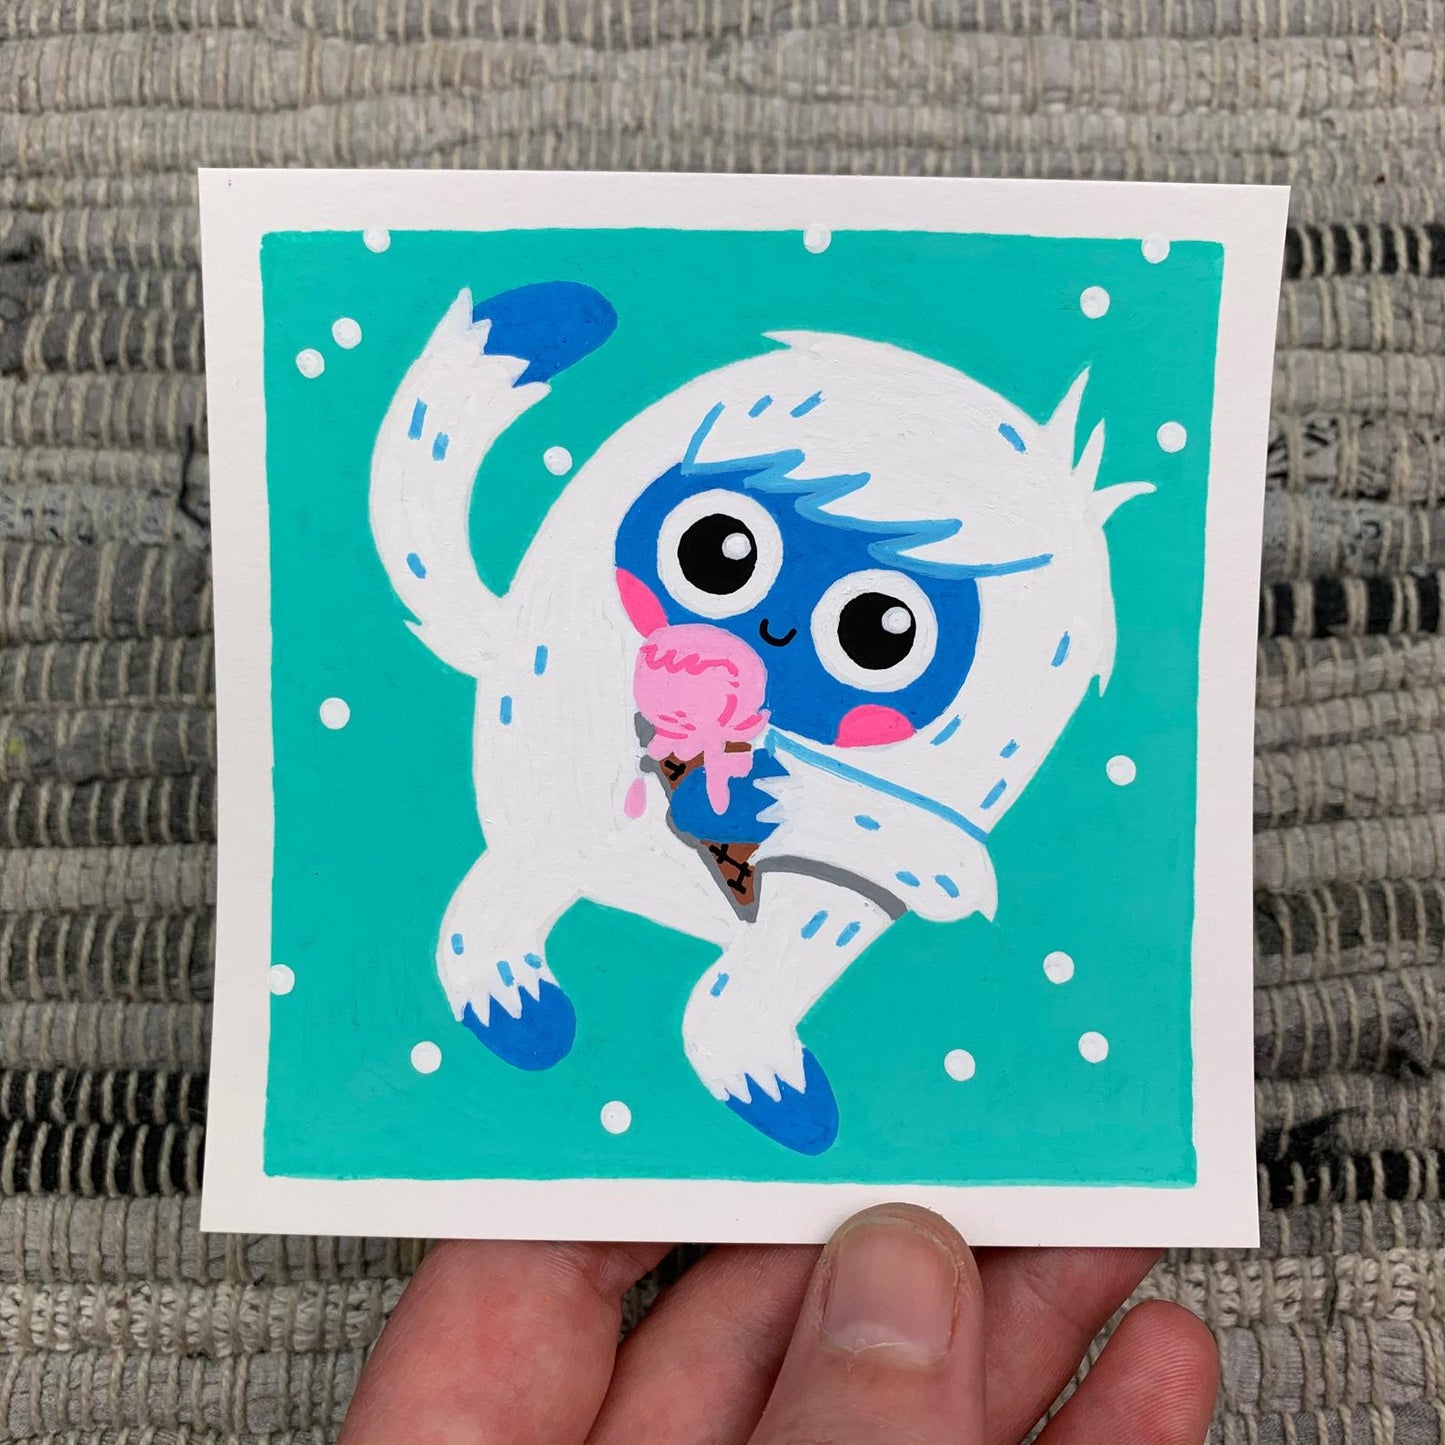 Original artwork of a cute mythical yeti (or abominable snowman) licking a pink ice cream cone in the snow. Materials used: Uni-Posca paint markers.